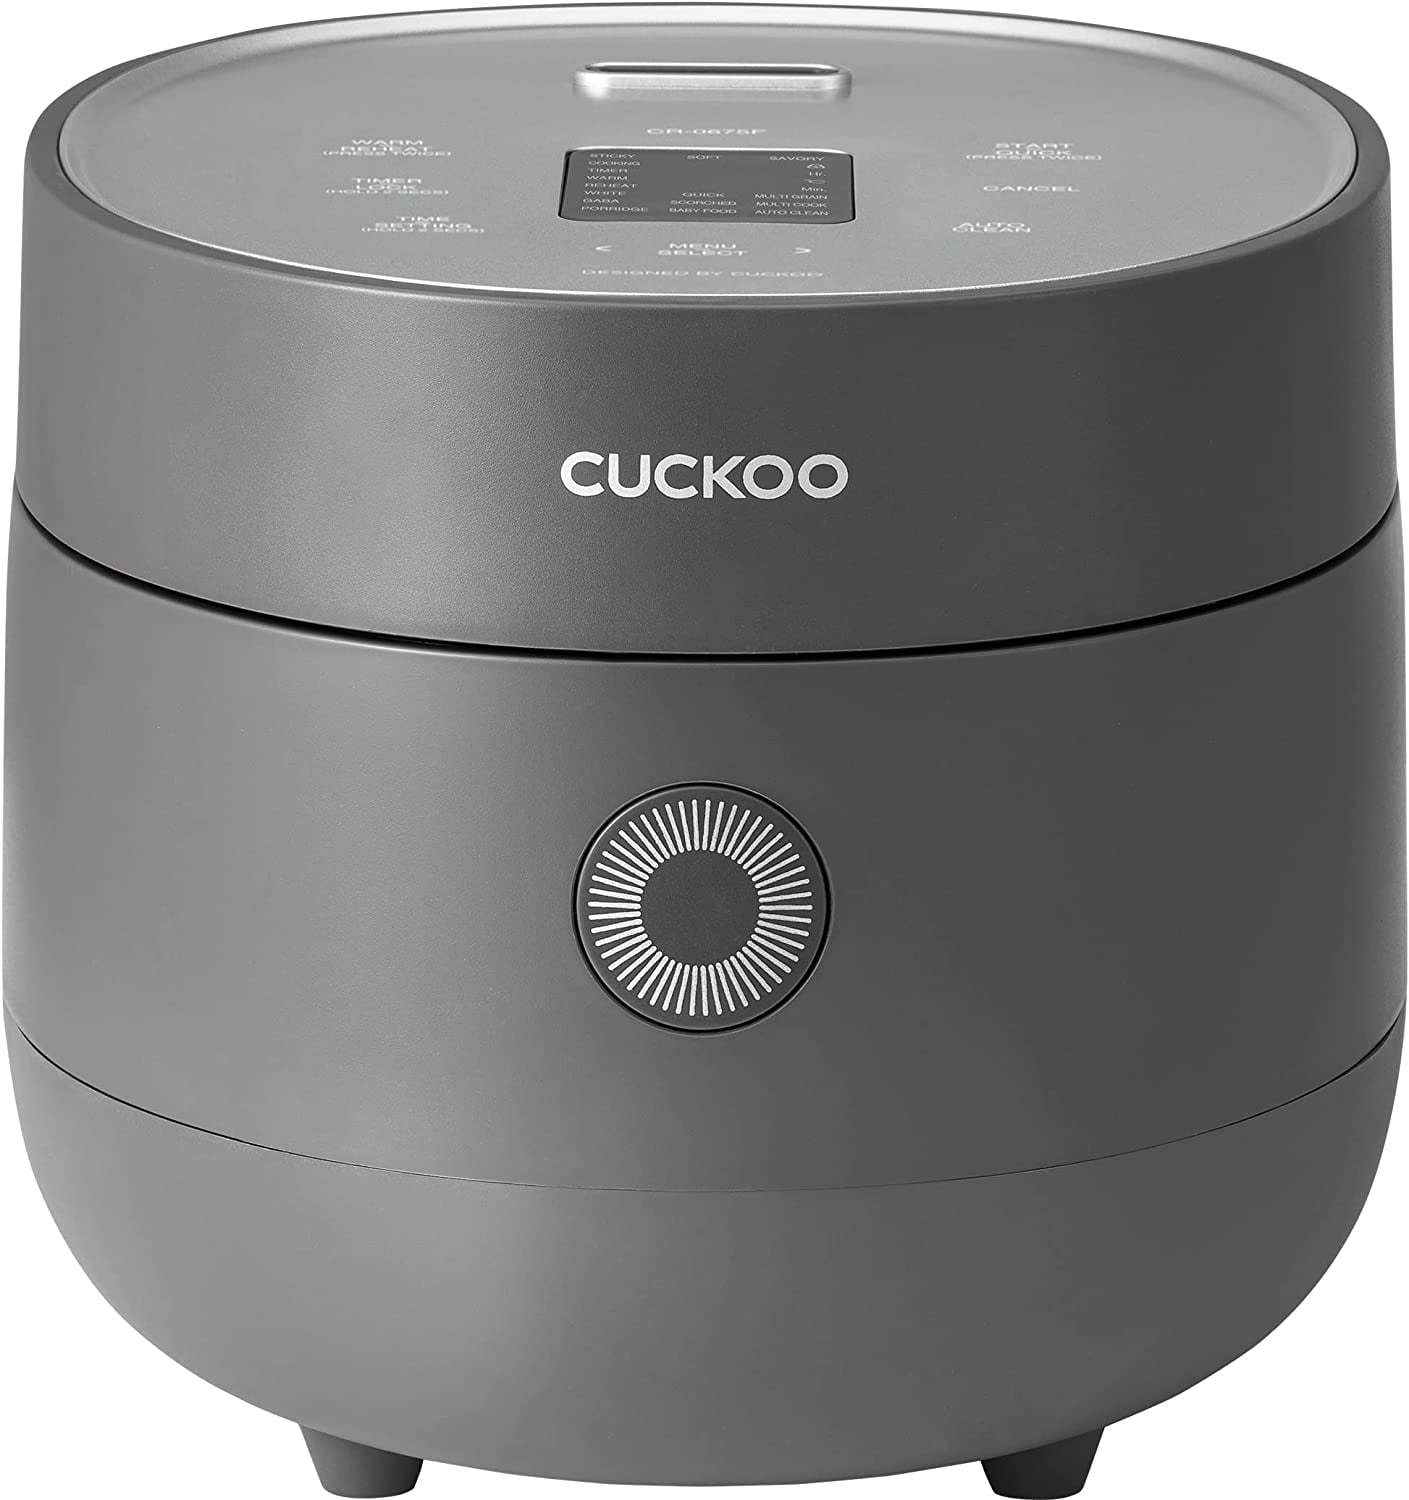 CUCKOO CR-0675F, 6-Cup (Uncooked) Micom Rice Cooker, 13 Menu Options:  Quinoa, Oatmeal, Brown Rice & More, Touch-Screen, Nonstick Inner Pot